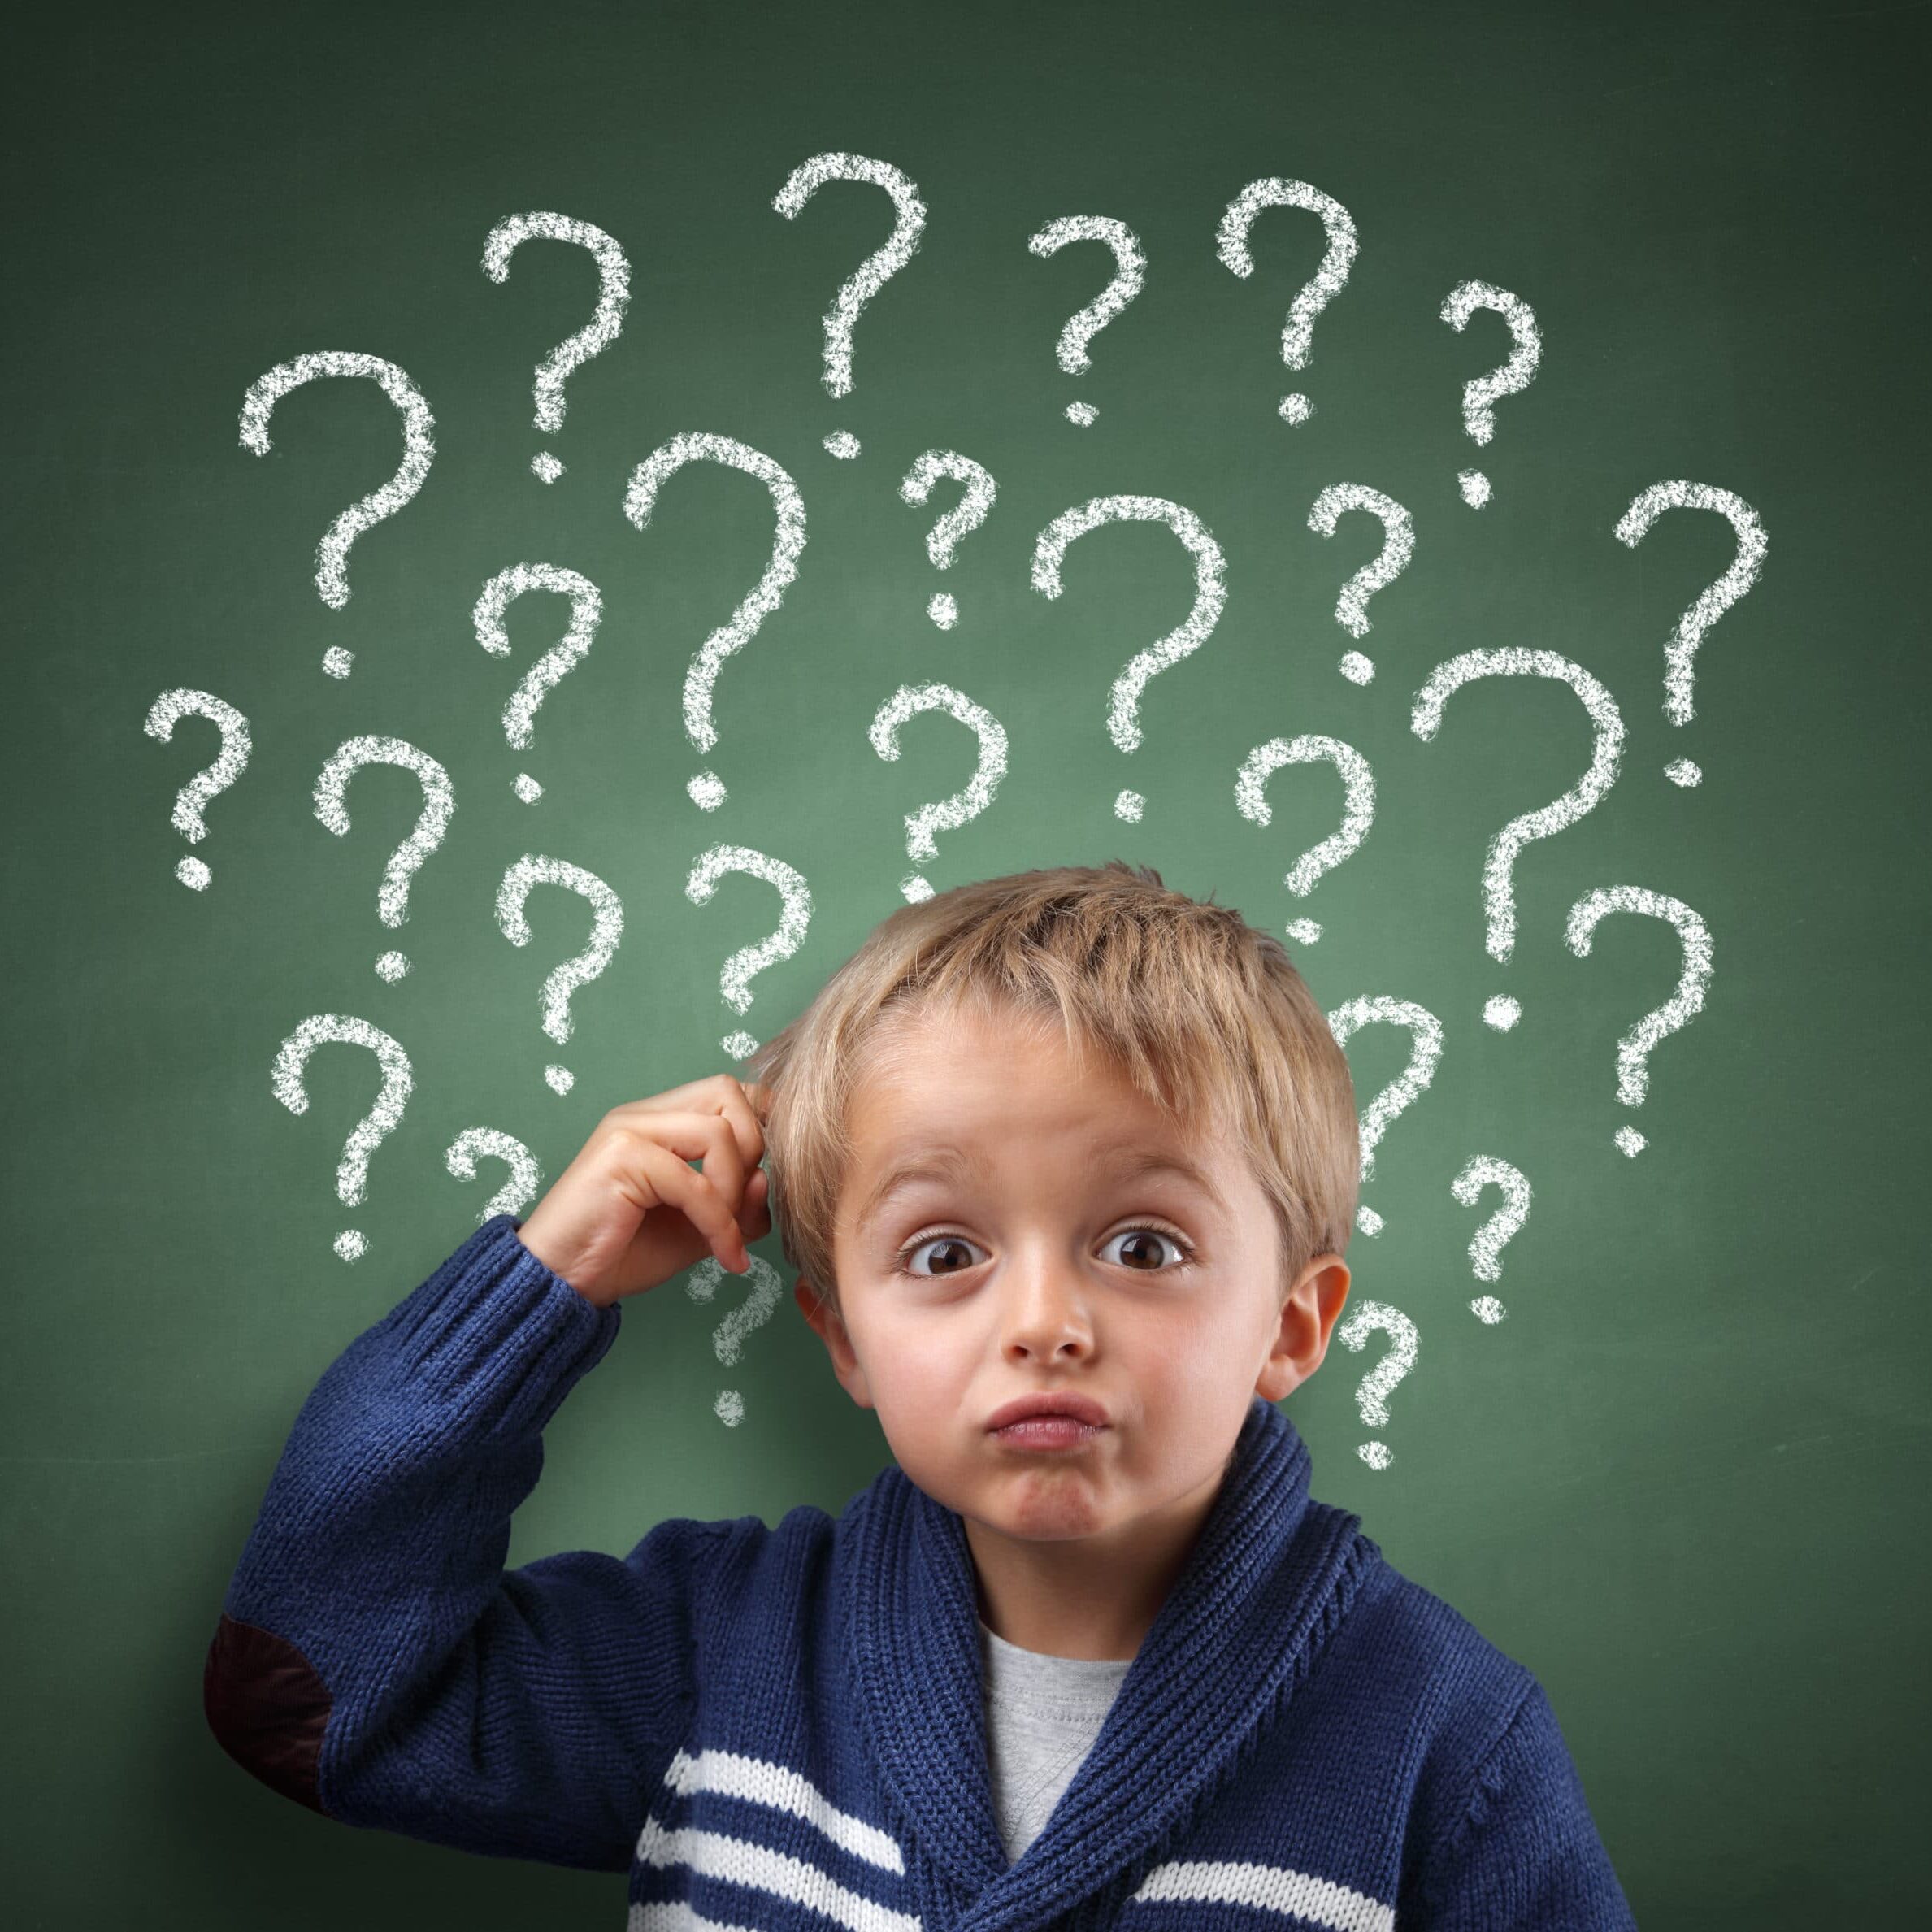 boy scratching head with question marks above him